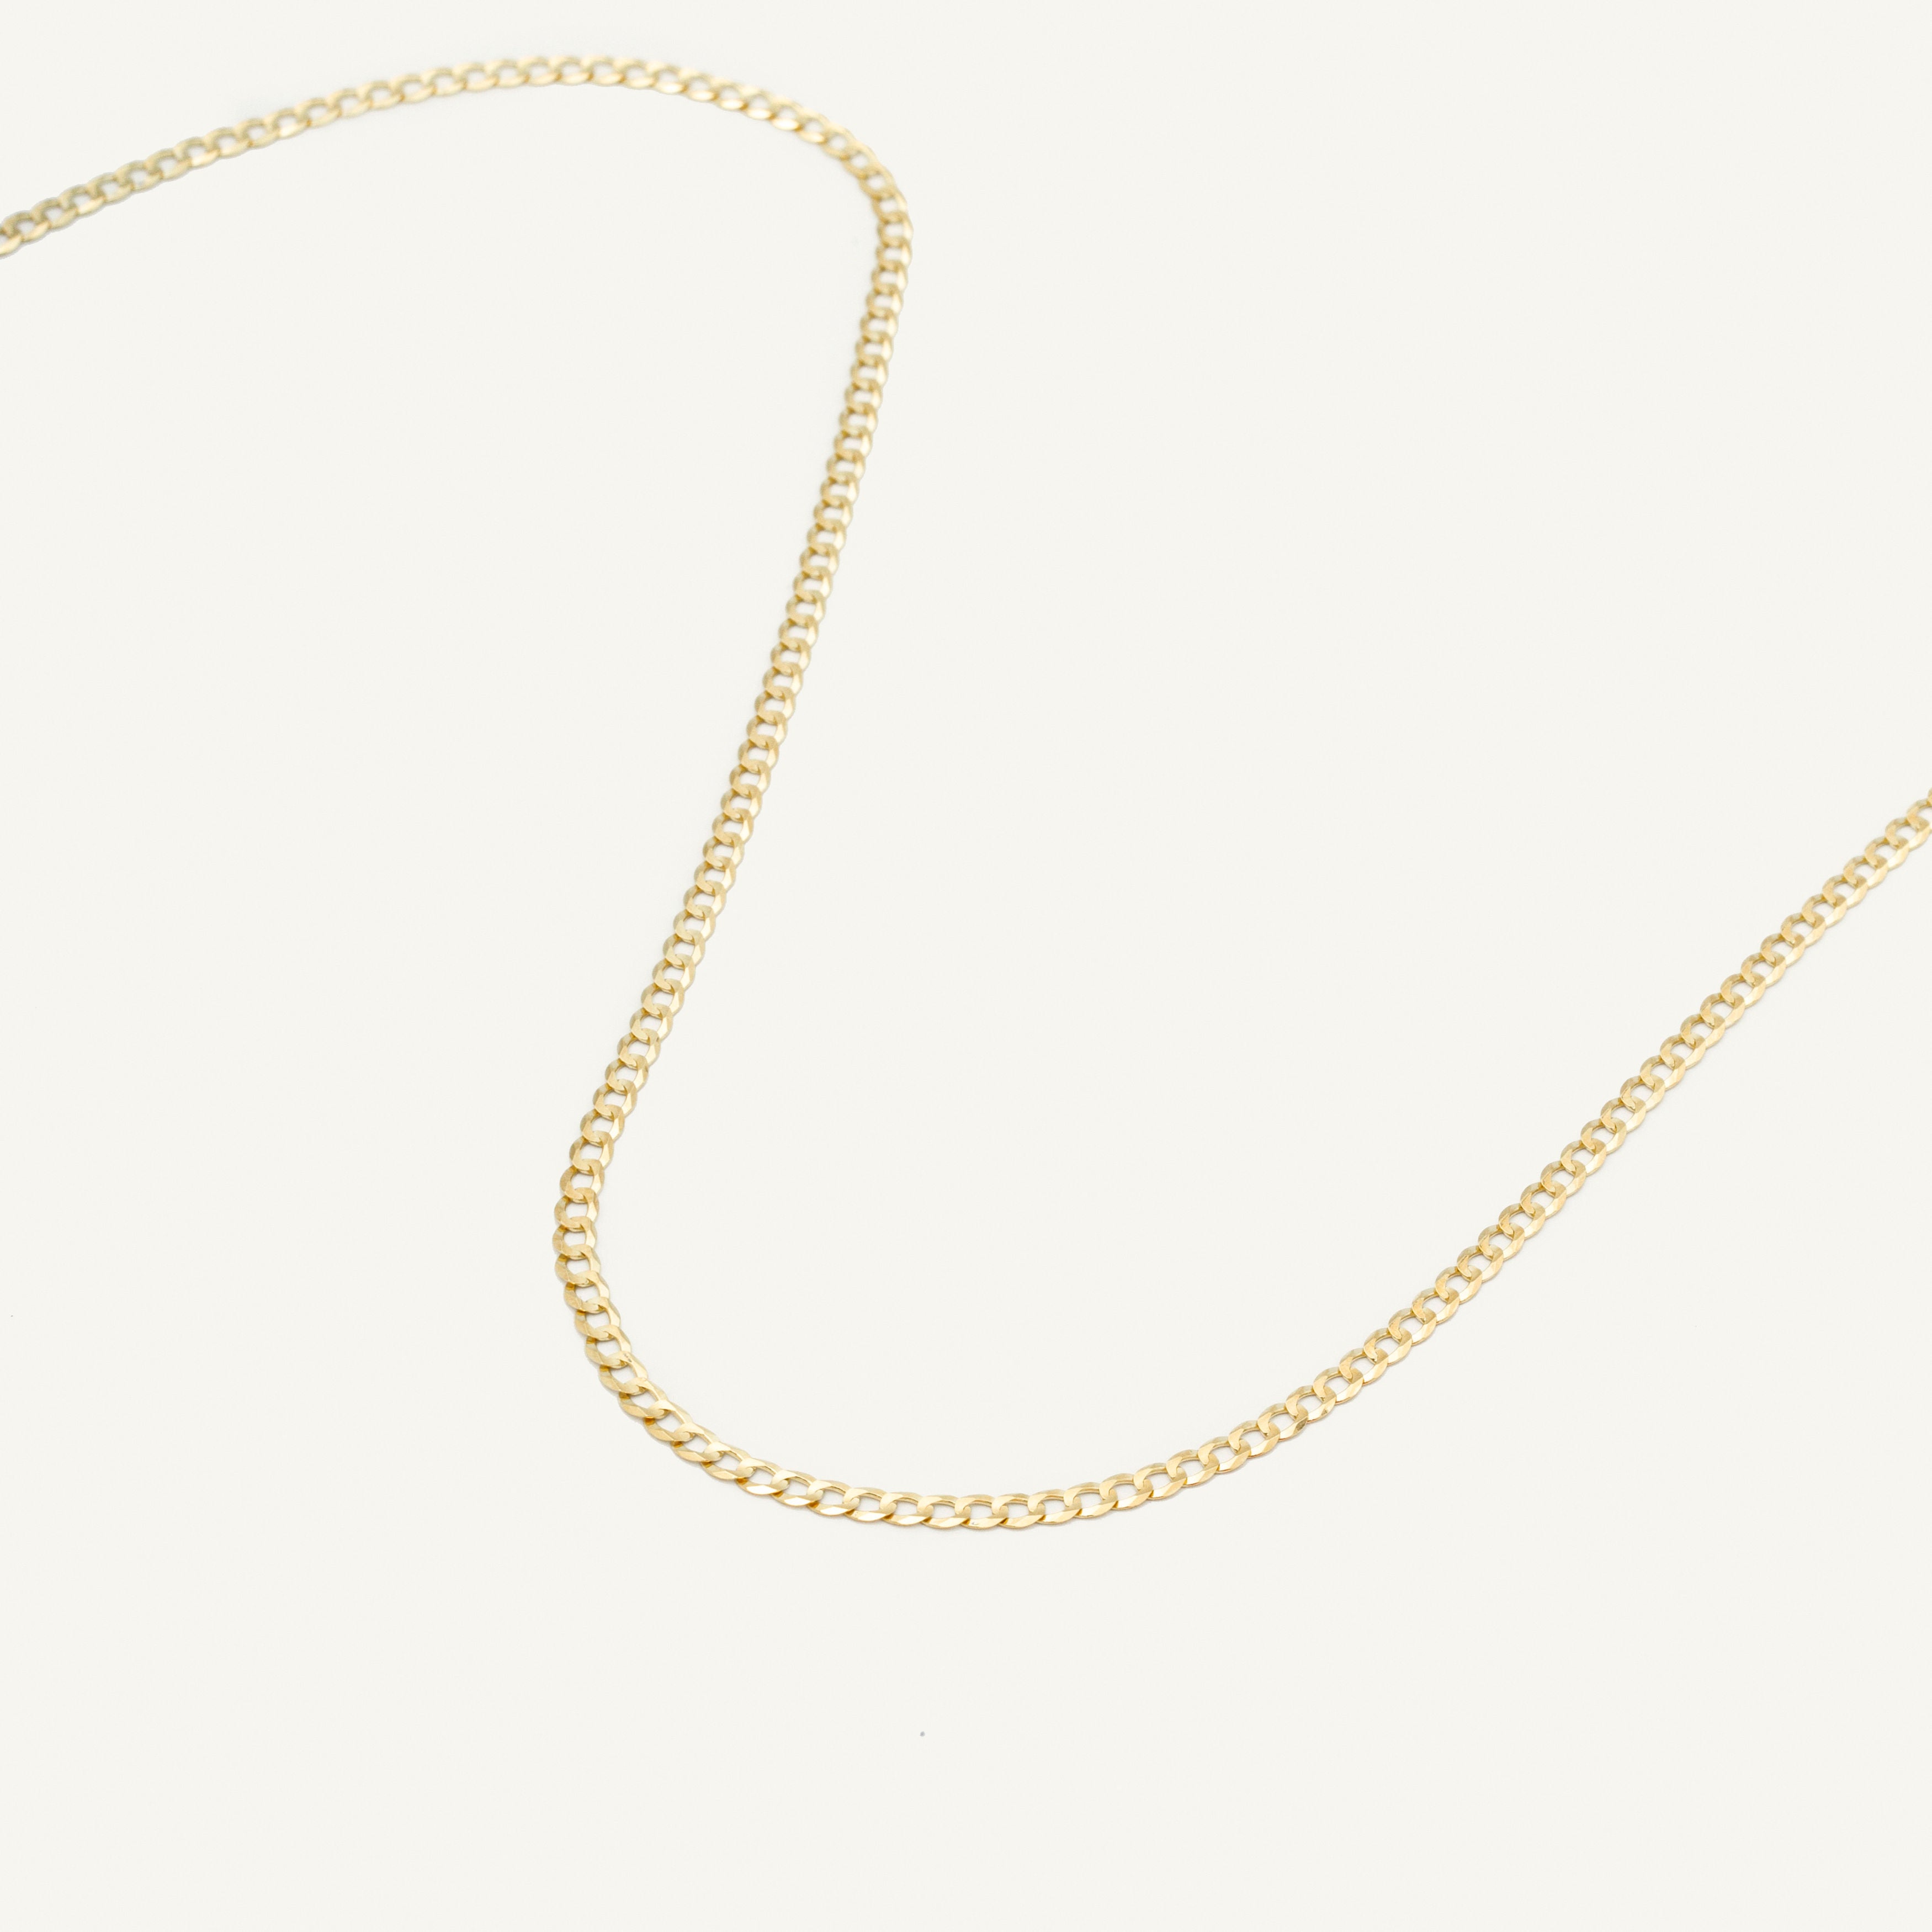 Classic 14K Gold Curb Link Necklace